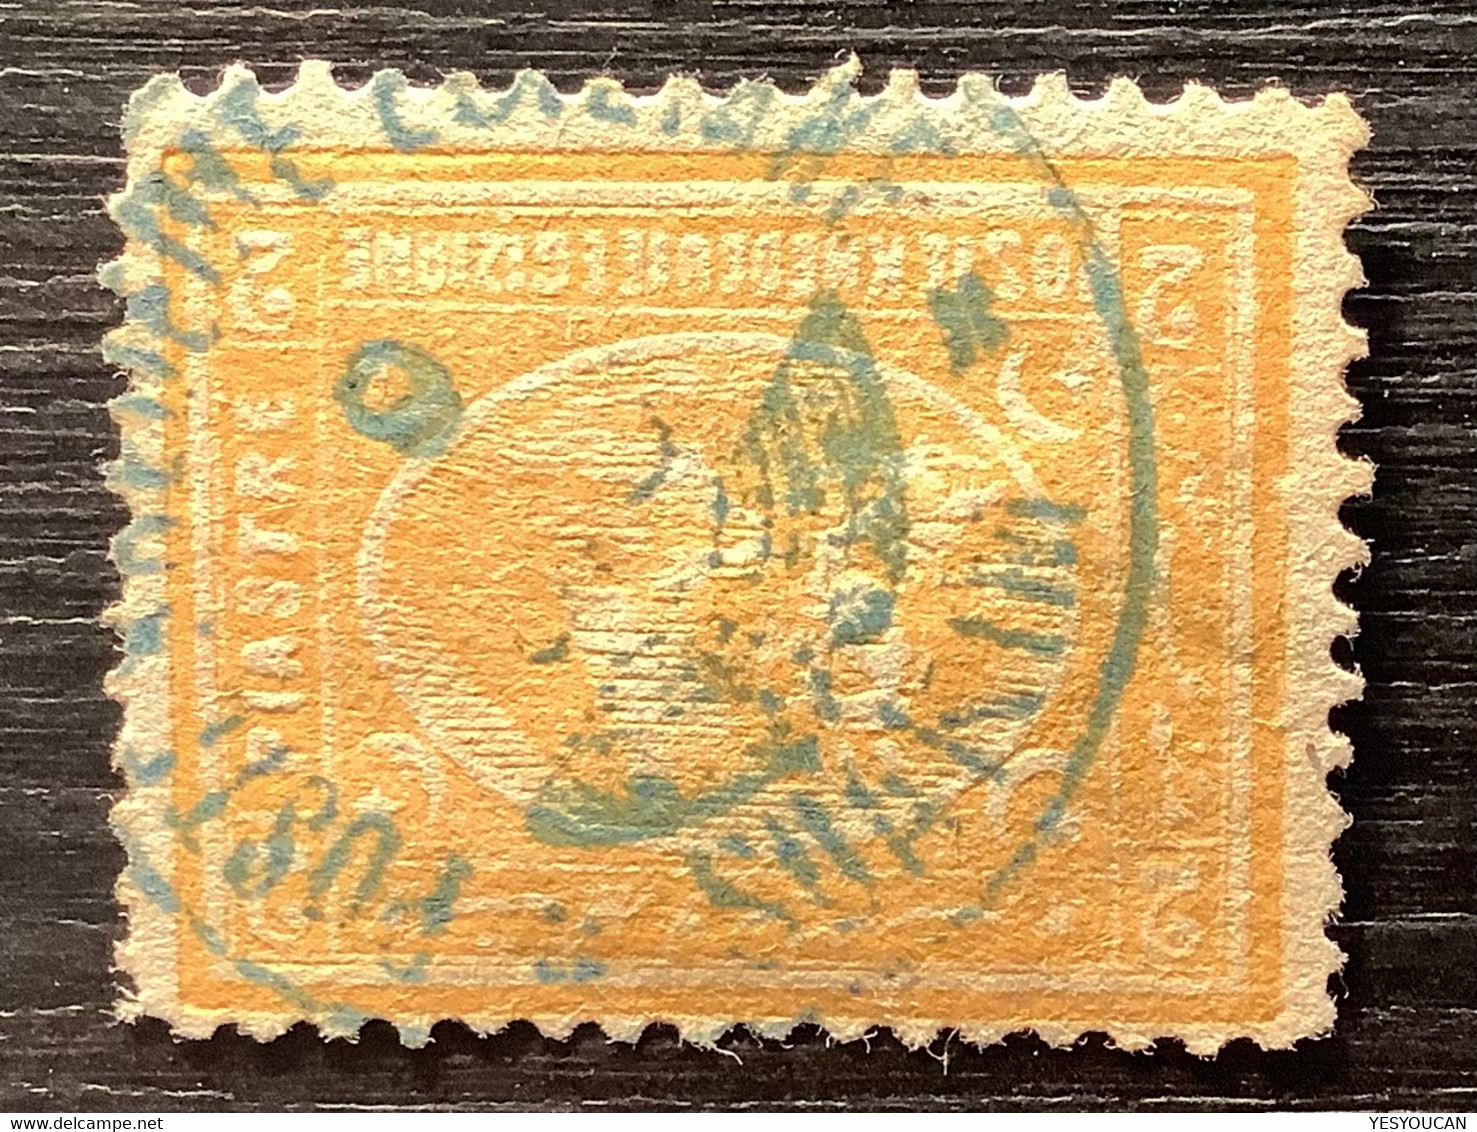 Egypt Used In Sudan: SUAKIM RRR ! (Suakin Soudan) On 1872 2 Pi ONLY ONE COVER KNOWN WITH THIS POSTMARK (Egypte - 1866-1914 Khedivate Of Egypt